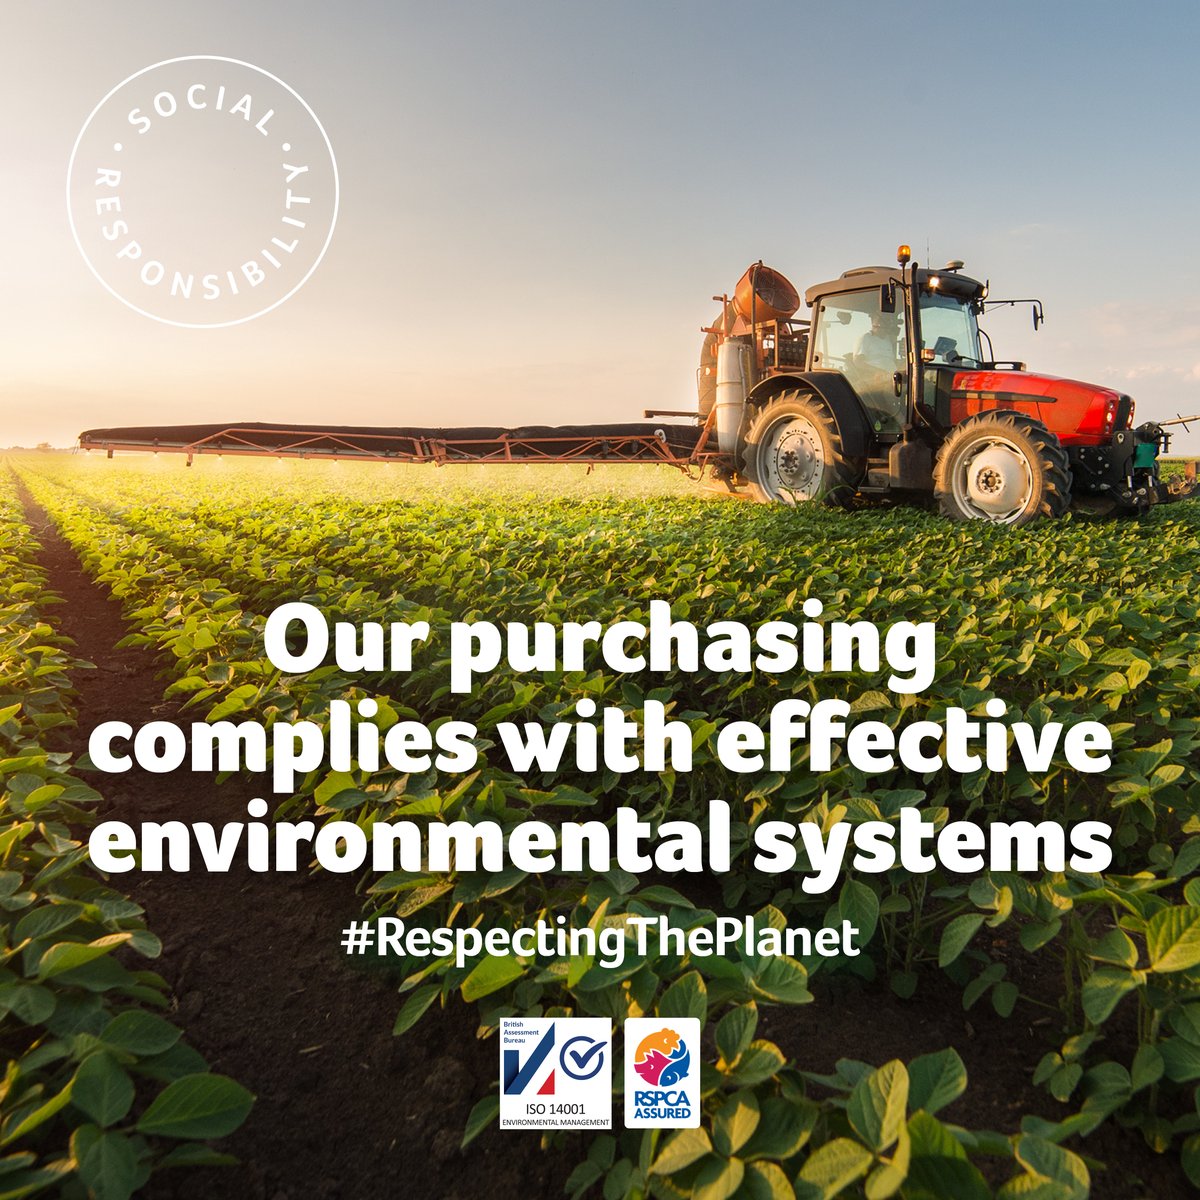 For over 20 years we have made sure our purchasing processes have effective environmental commitments at the forefront of what we do🌍🍃 #SustainablePurchasing #EcoFriendly #EnvironmentalCommitment #EthicalSourcing #RespectingthePlanet